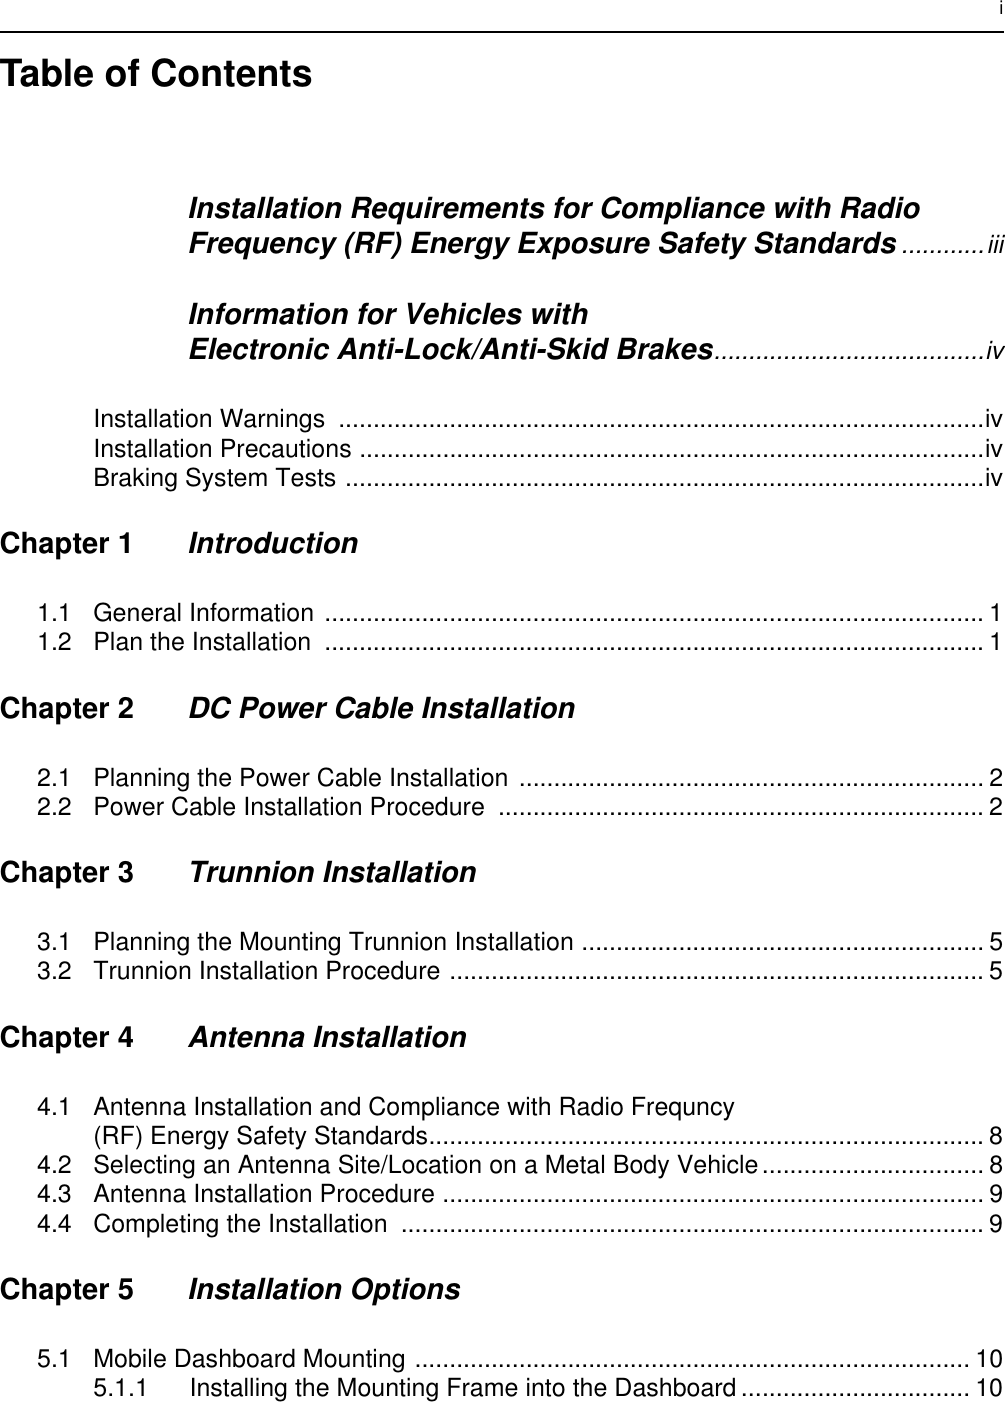 iTable of ContentsInstallation Requirements for Compliance with RadioFrequency (RF) Energy Exposure Safety Standards ............iiiInformation for Vehicles with Electronic Anti-Lock/Anti-Skid Brakes.......................................ivInstallation Warnings  .............................................................................................ivInstallation Precautions ..........................................................................................ivBraking System Tests ............................................................................................ivChapter 1 Introduction1.1 General Information ............................................................................................... 11.2 Plan the Installation  ............................................................................................... 1Chapter 2 DC Power Cable Installation2.1 Planning the Power Cable Installation ................................................................... 22.2 Power Cable Installation Procedure ...................................................................... 2Chapter 3 Trunnion Installation3.1 Planning the Mounting Trunnion Installation .......................................................... 53.2 Trunnion Installation Procedure ............................................................................. 5Chapter 4 Antenna Installation4.1 Antenna Installation and Compliance with Radio Frequncy(RF) Energy Safety Standards................................................................................ 84.2 Selecting an Antenna Site/Location on a Metal Body Vehicle................................ 84.3 Antenna Installation Procedure .............................................................................. 94.4 Completing the Installation .................................................................................... 9Chapter 5 Installation Options5.1 Mobile Dashboard Mounting ................................................................................ 105.1.1 Installing the Mounting Frame into the Dashboard ................................. 10